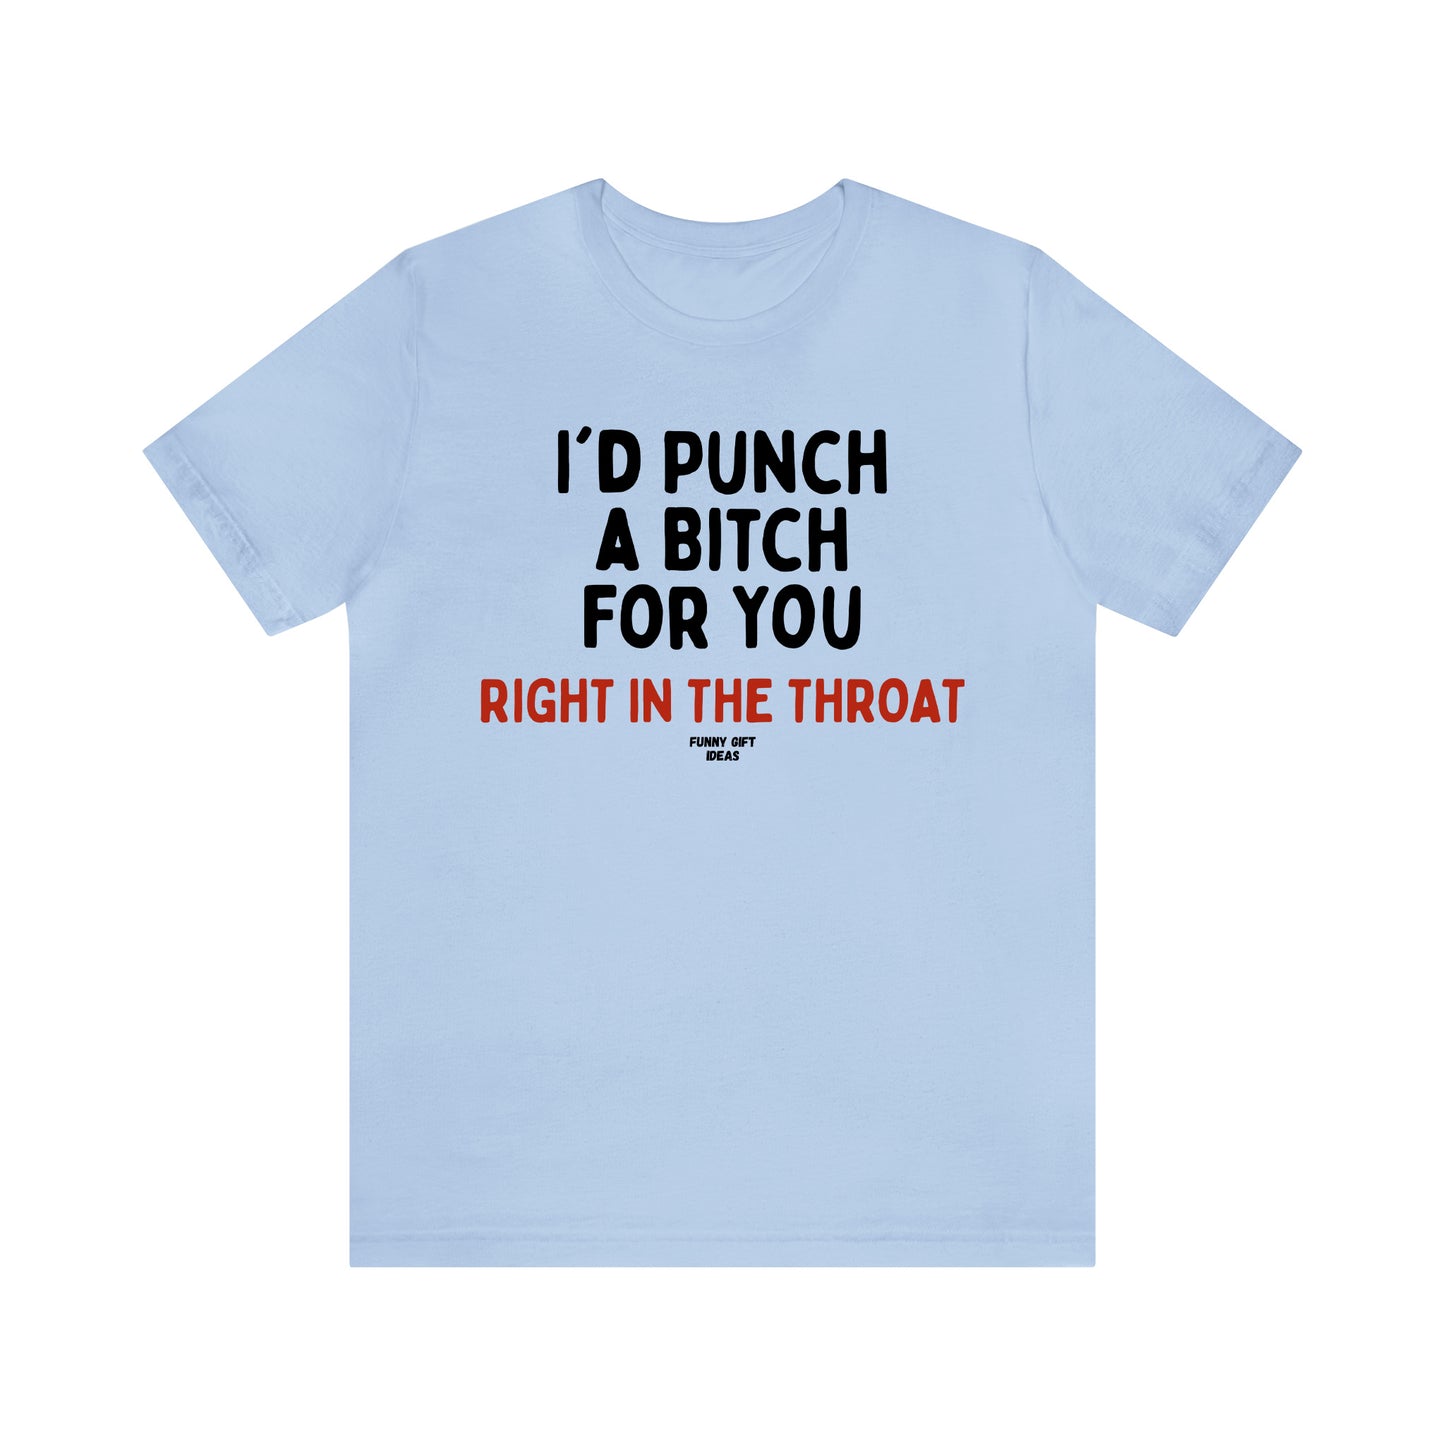 Funny Shirts for Women - I'd Punch a Bitch for You (Right in the Throat) - Women's T Shirts